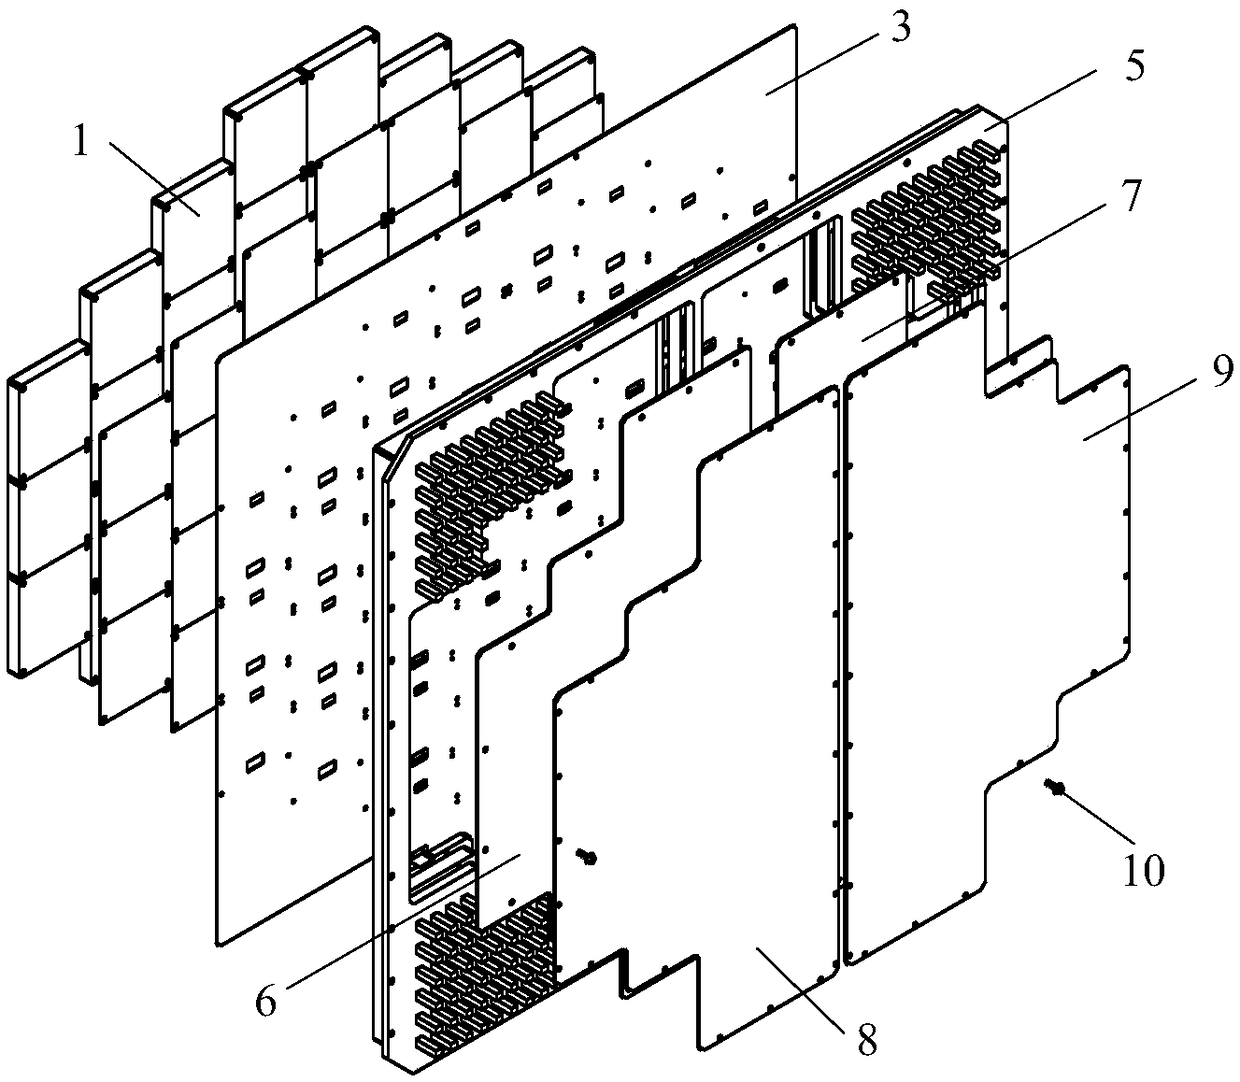 Heat dissipation temperature control technology for active phased array radar assembly